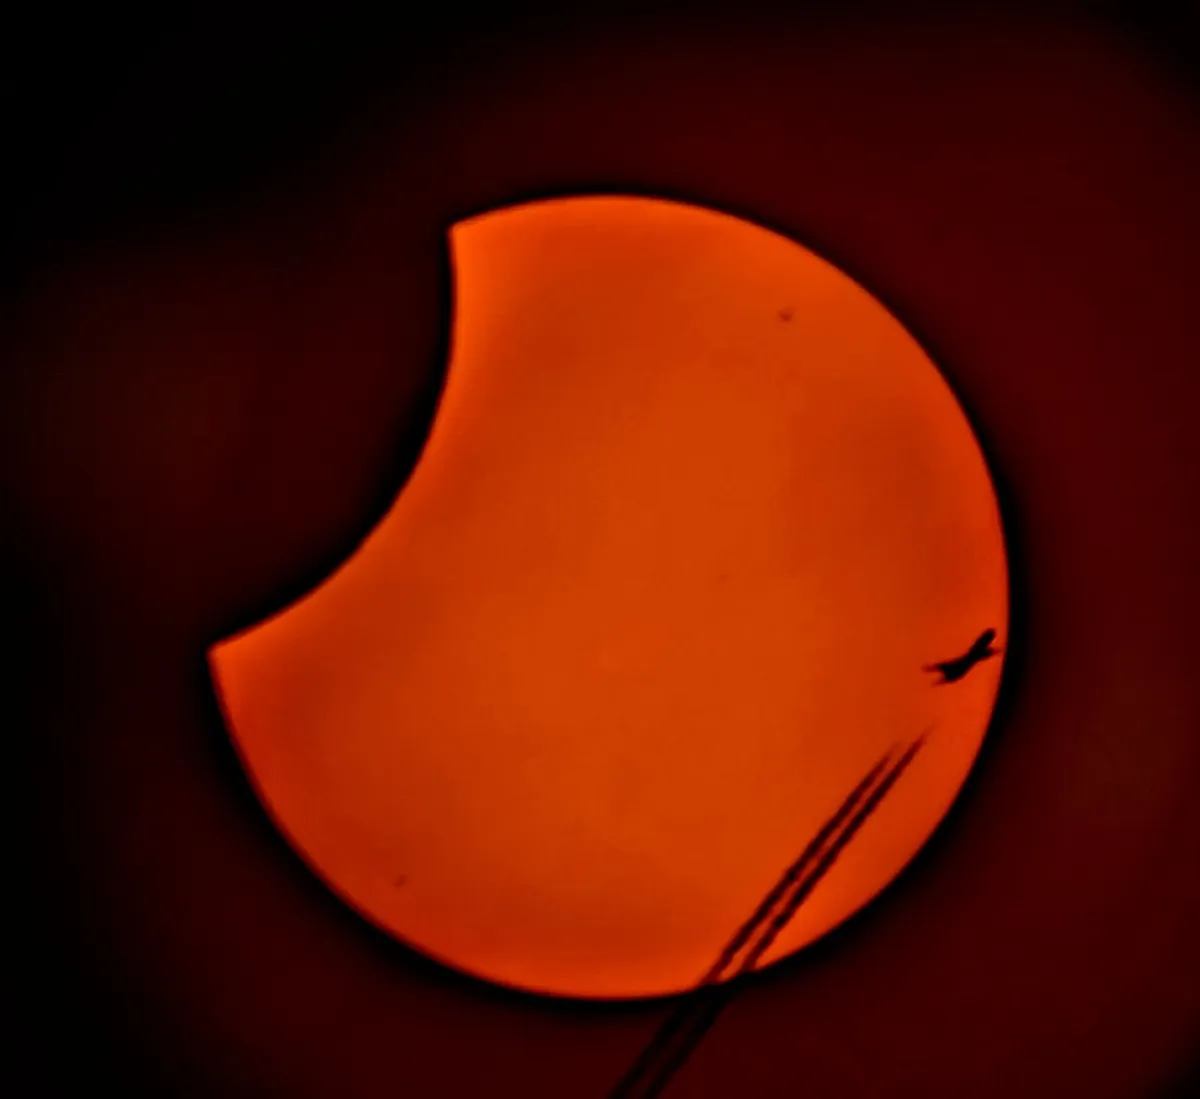 Partial Solar Eclipse and a plane, captured by Sonia Turkington, North Reddish, Stockport, UK, 25 October 2022, using a Sky-Watcher 10-inch Dobsonian a Google Pixel smartphone and Seymour 12” solar film.